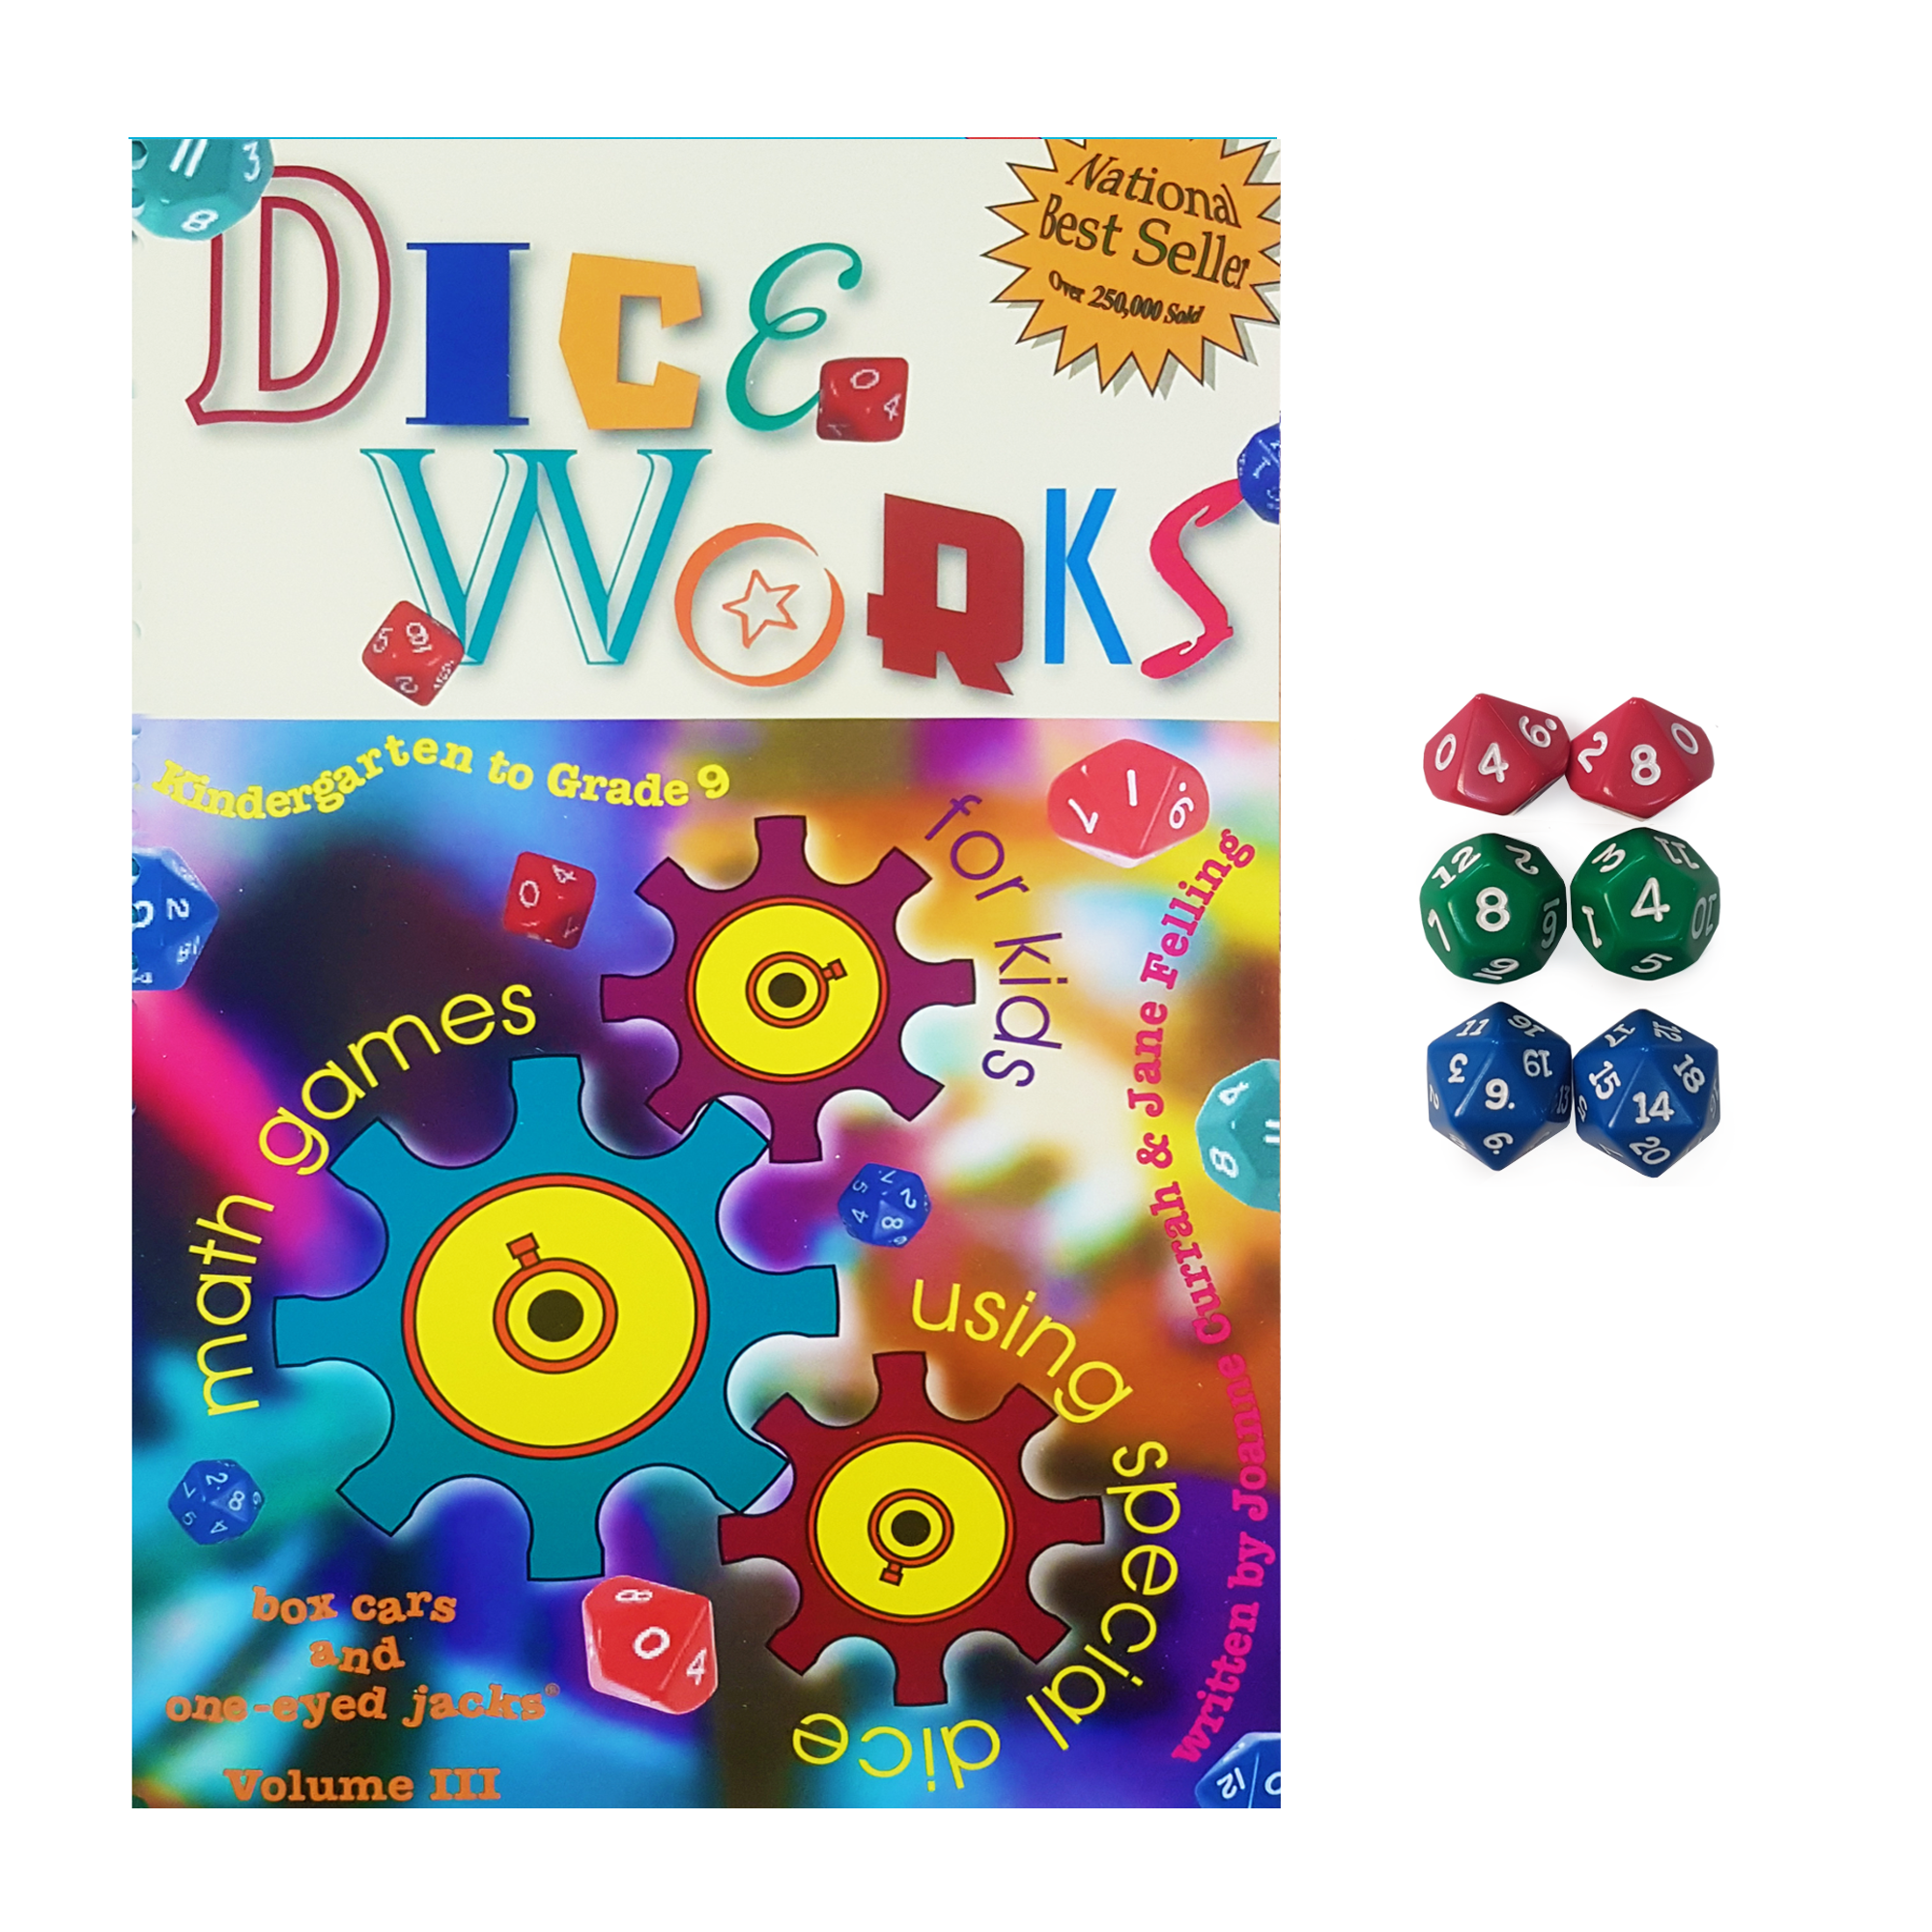 6 Sided Dice and 10 Sided Dice  Educational Resource Select 10 to 60